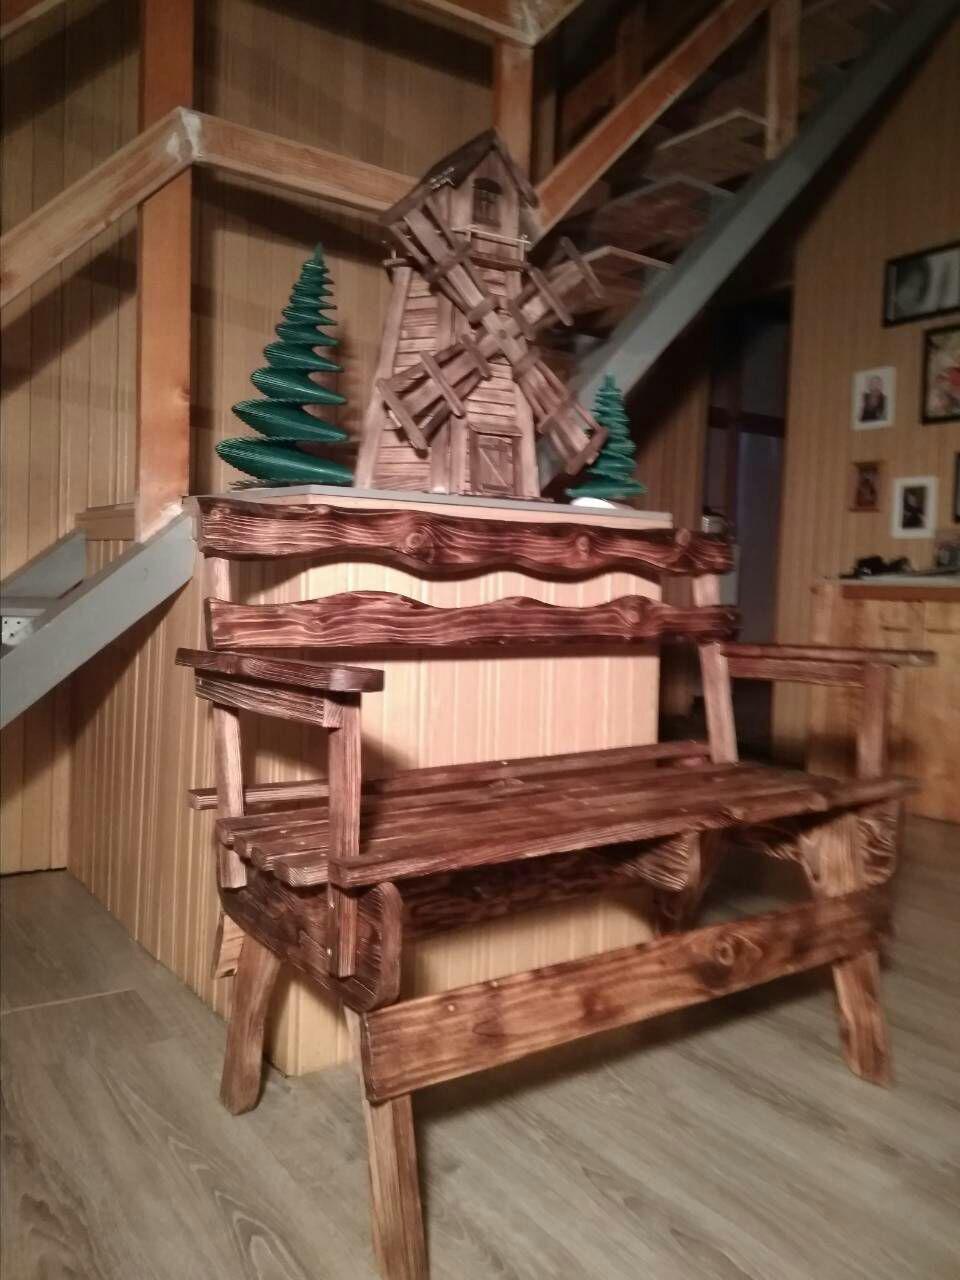 Woodwork made by my dad - My, Wood products, Bench, Housekeeper, Mill, Barrel, Handmade, Interior items, Interior, Longpost